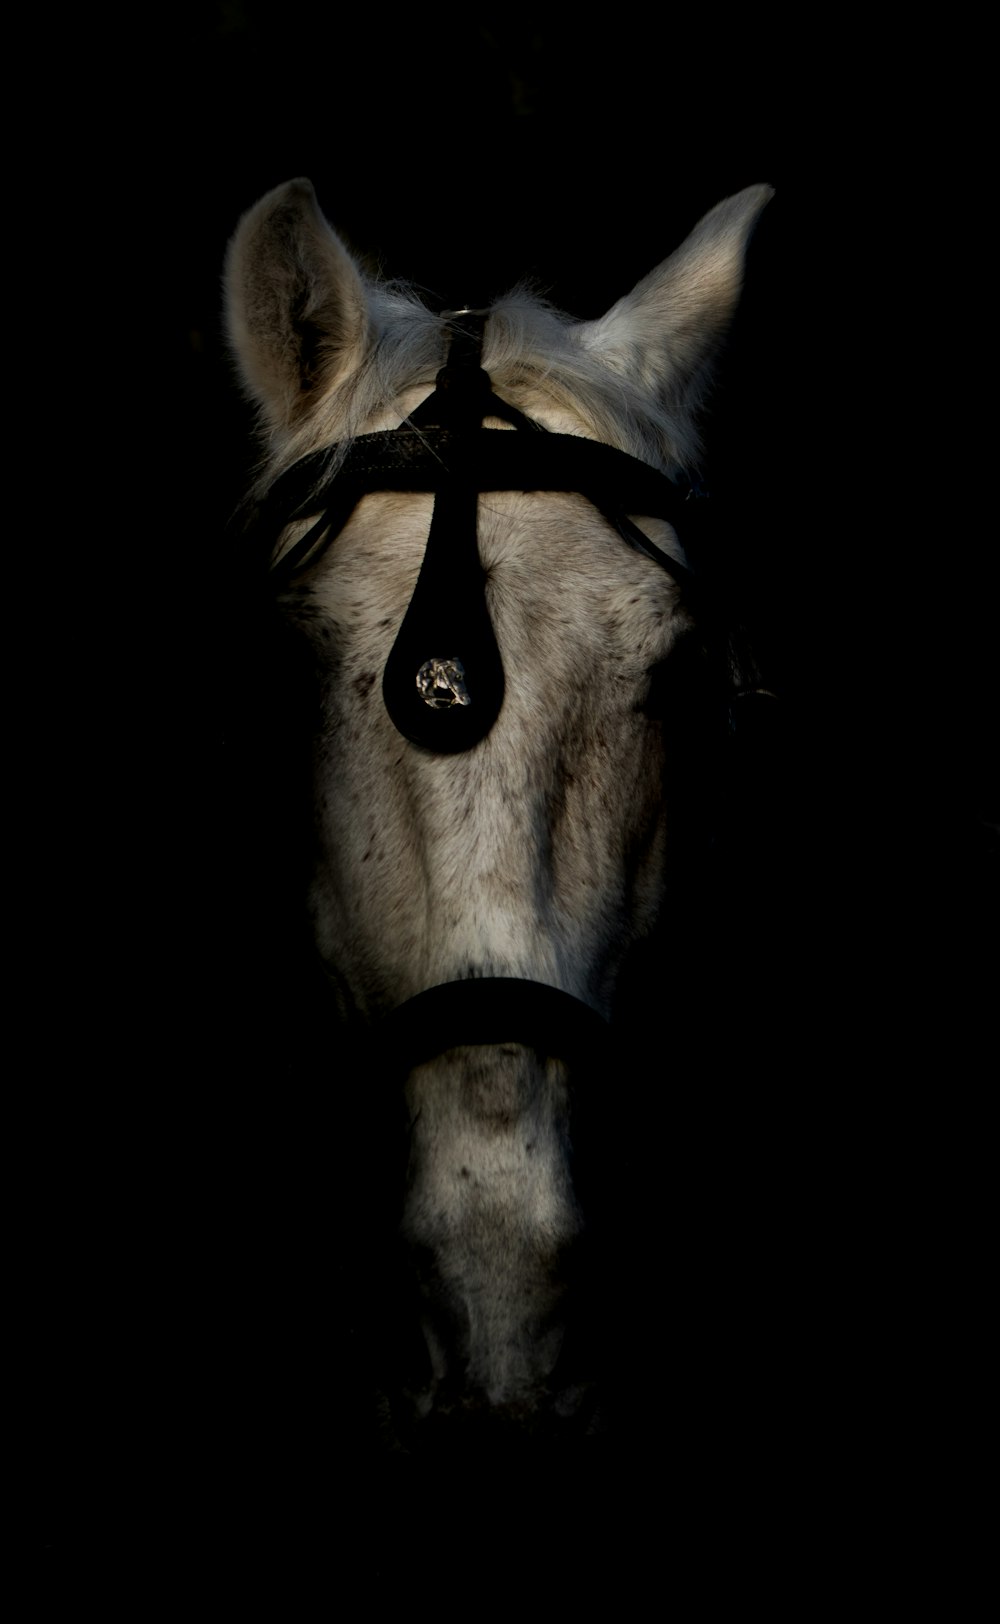 a close up of a horse's head in the dark